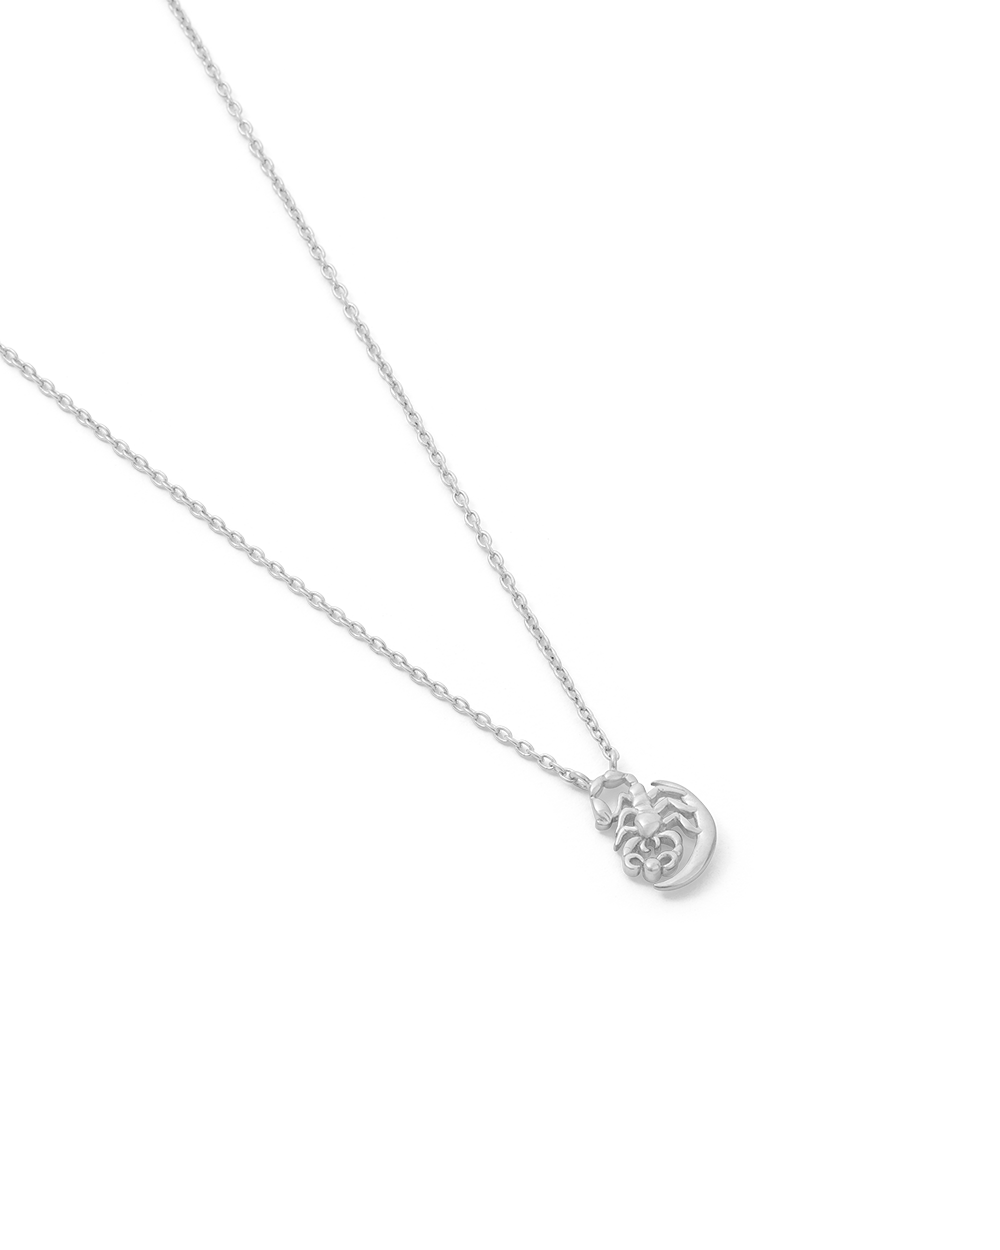 SCORPIO STAR SIGN NECKLACE (STERLING SILVER)